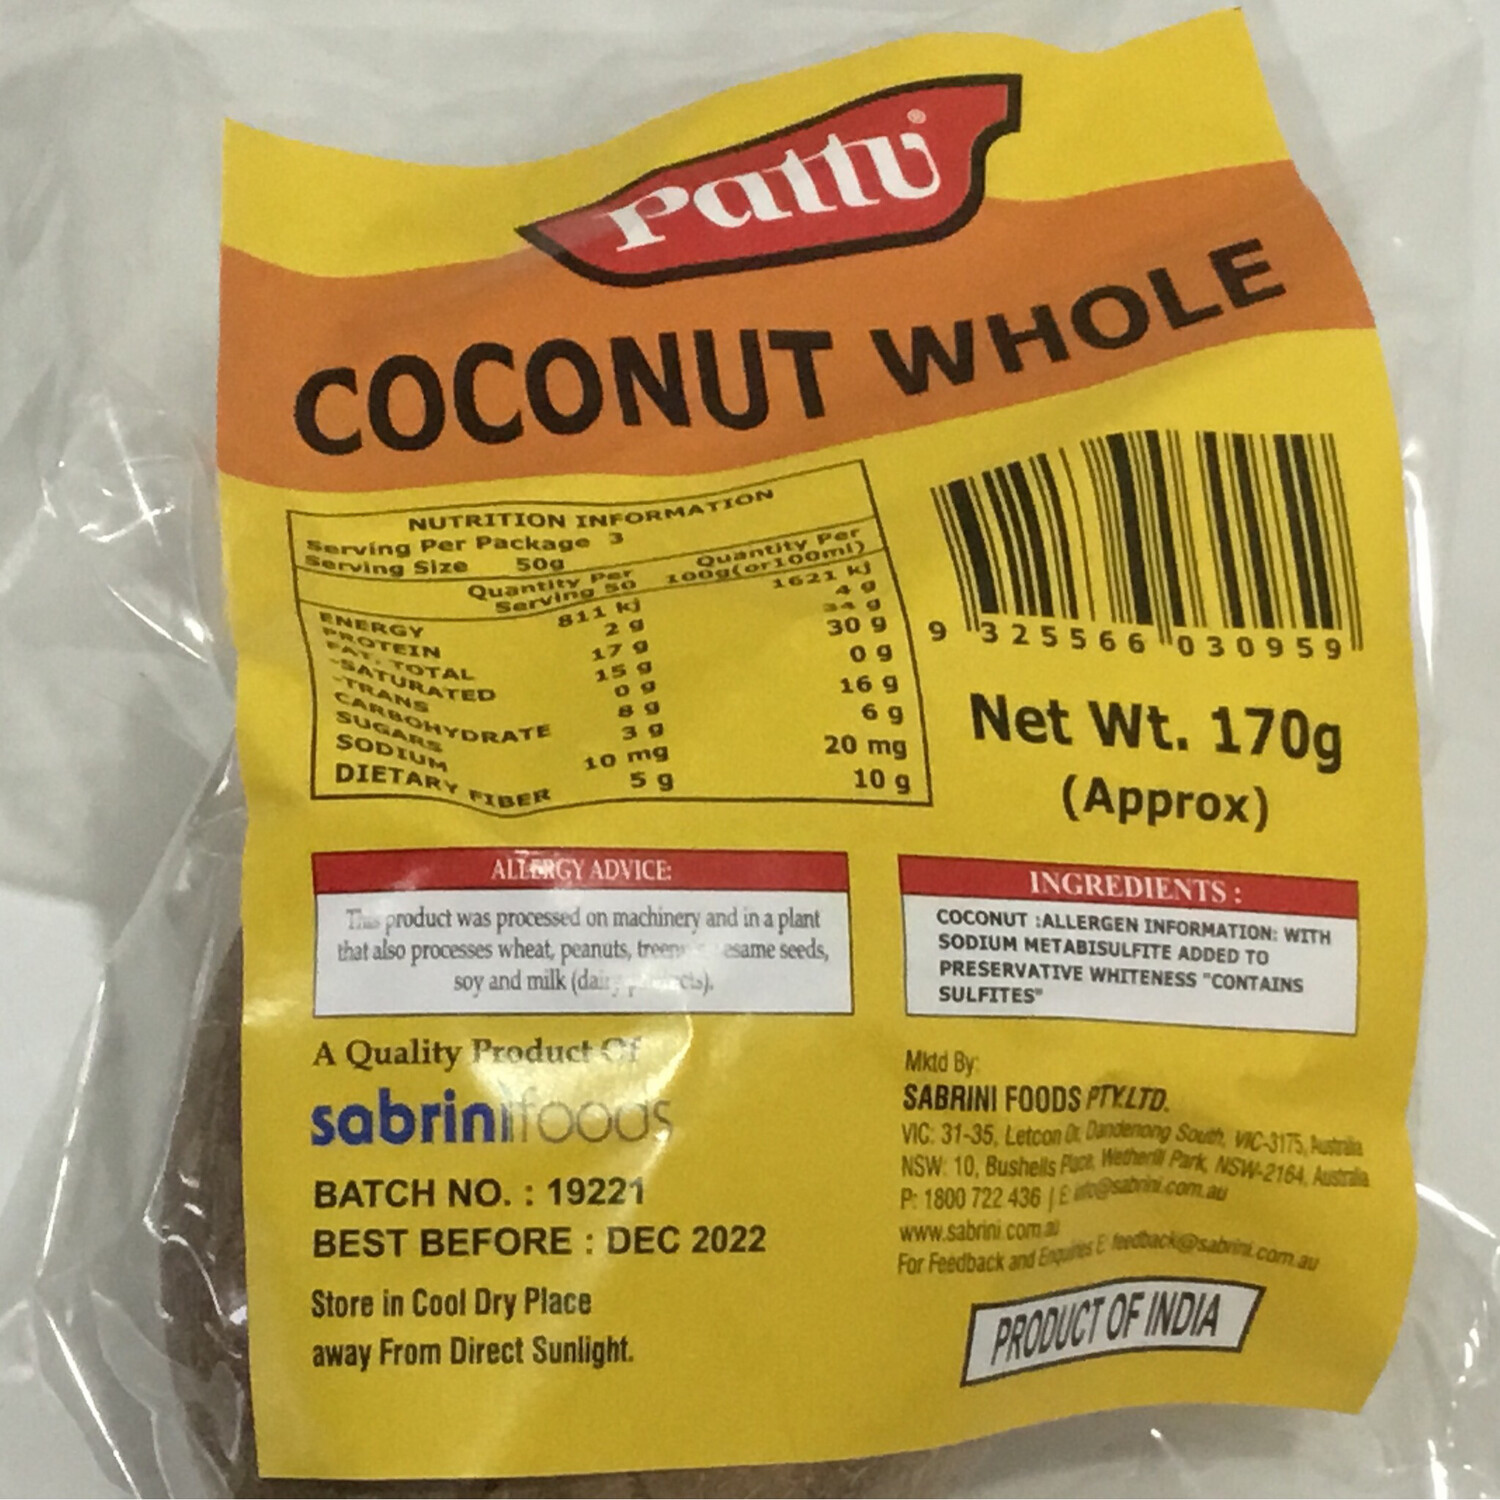 PATTU DRY COCONUT WHOLE APPROX 170 GMS